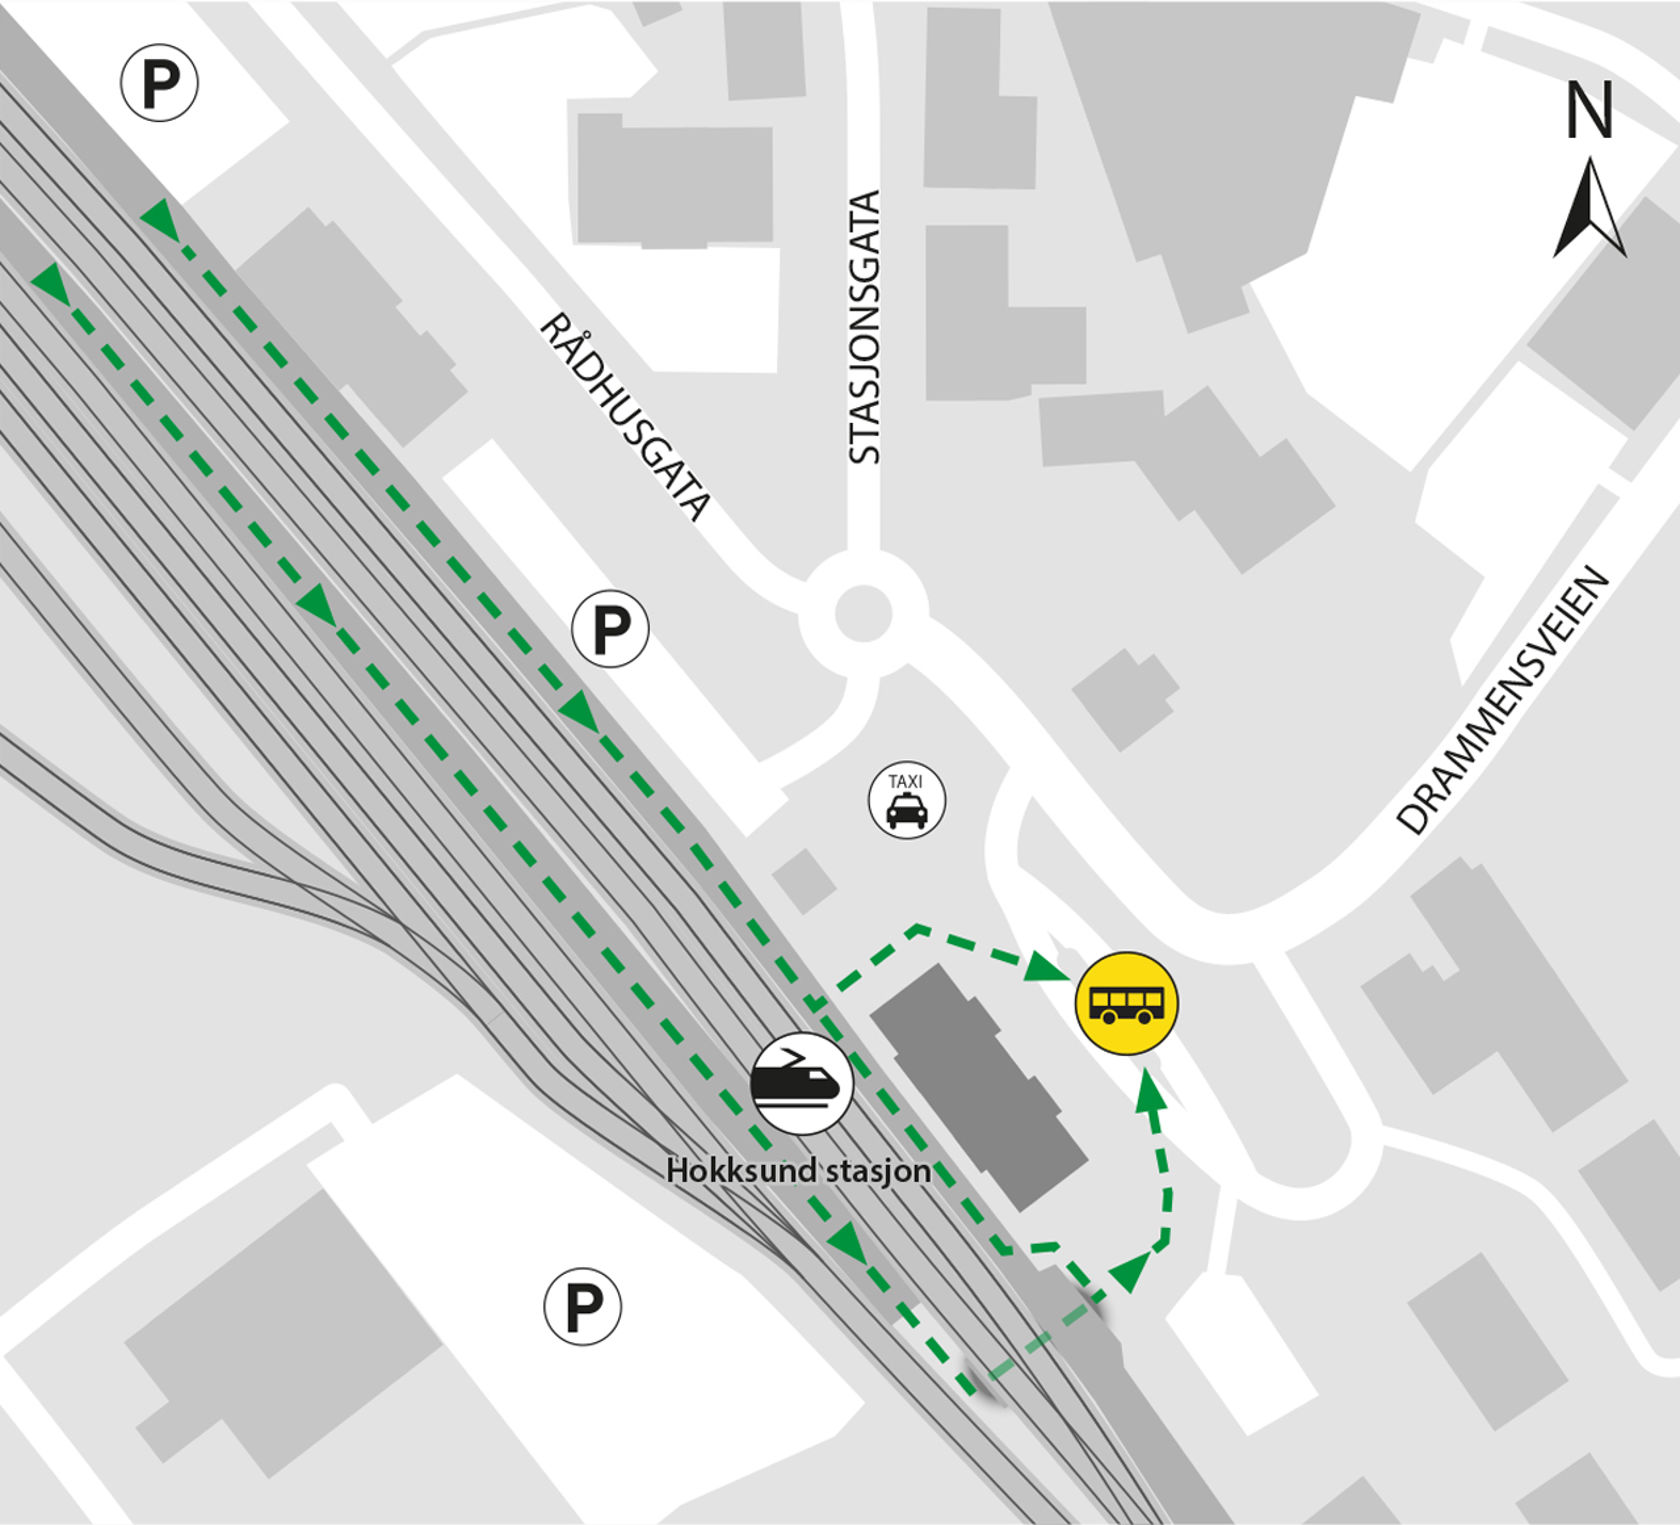 Map shows rail replacement service departs from bus stop at Hokksund station.